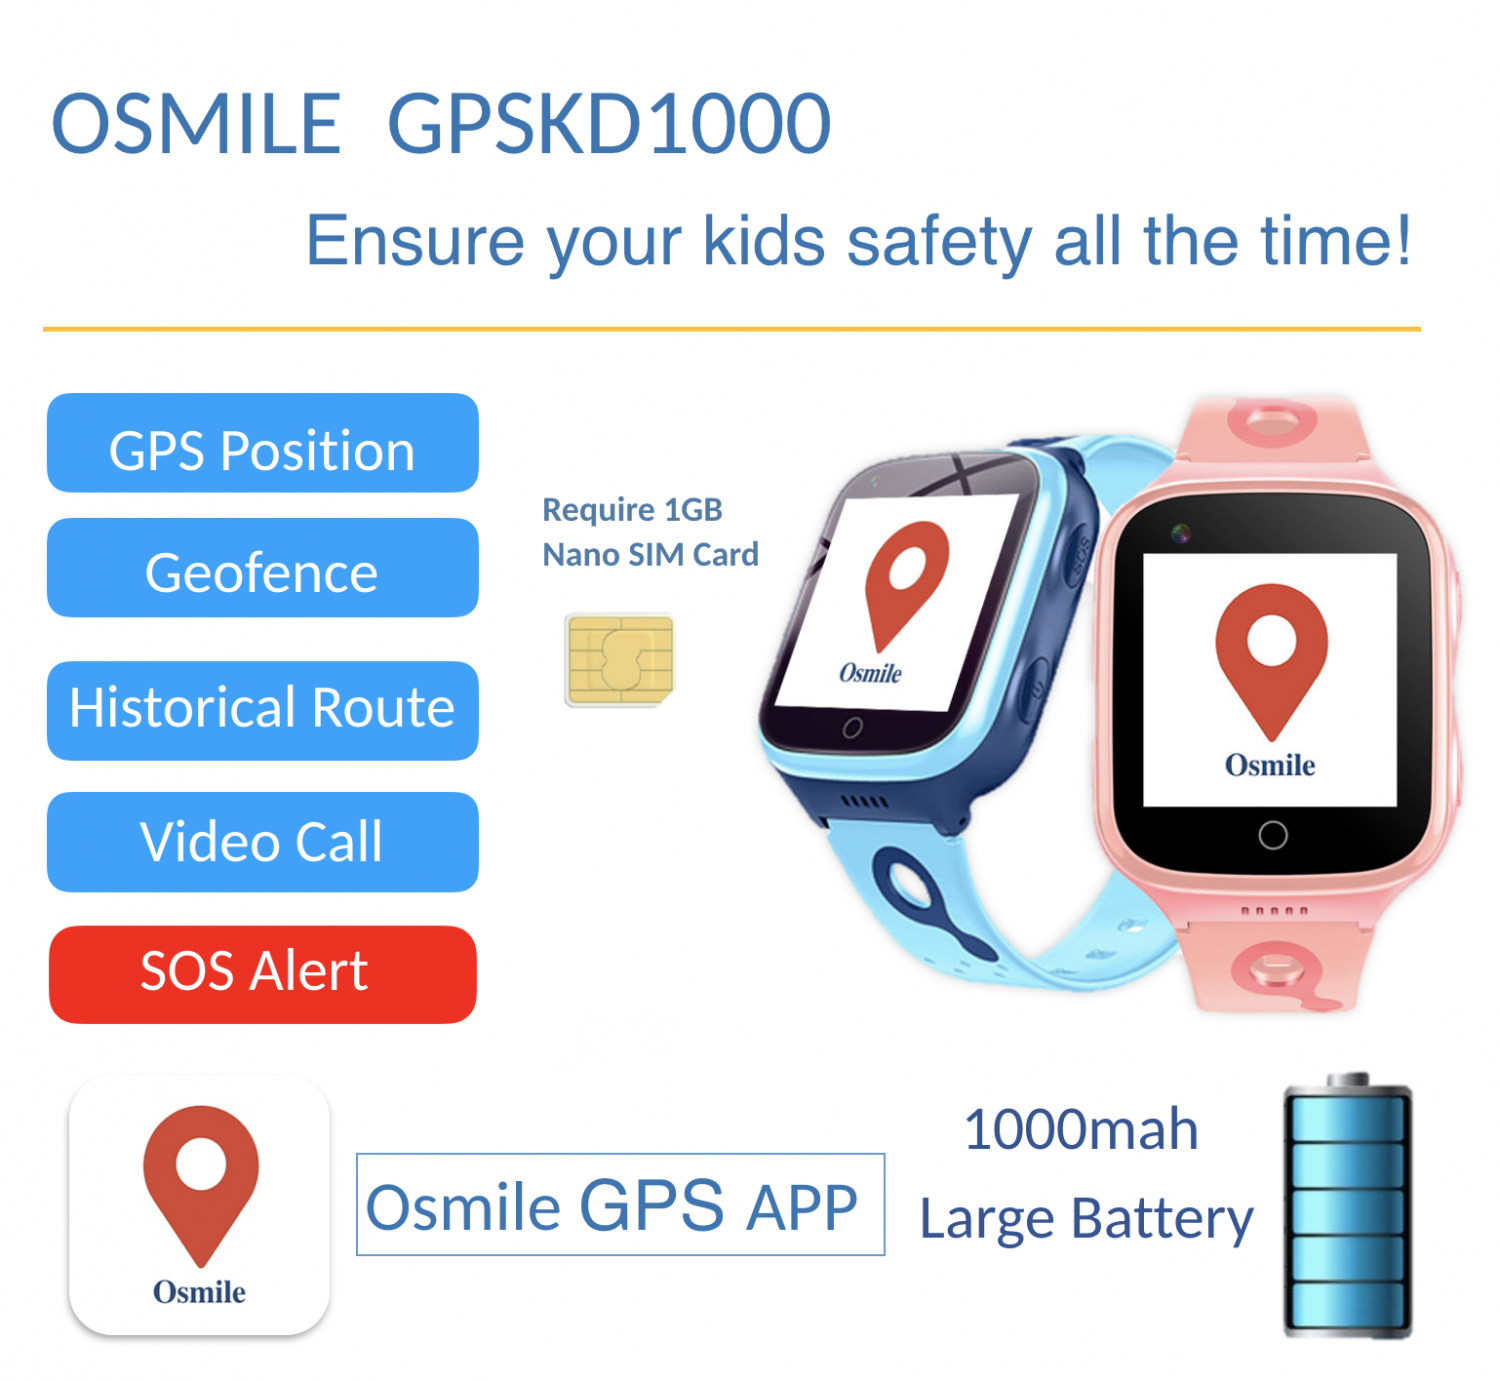 Osmile GPSKD1000 (L) KIDS' Watch for Security Management